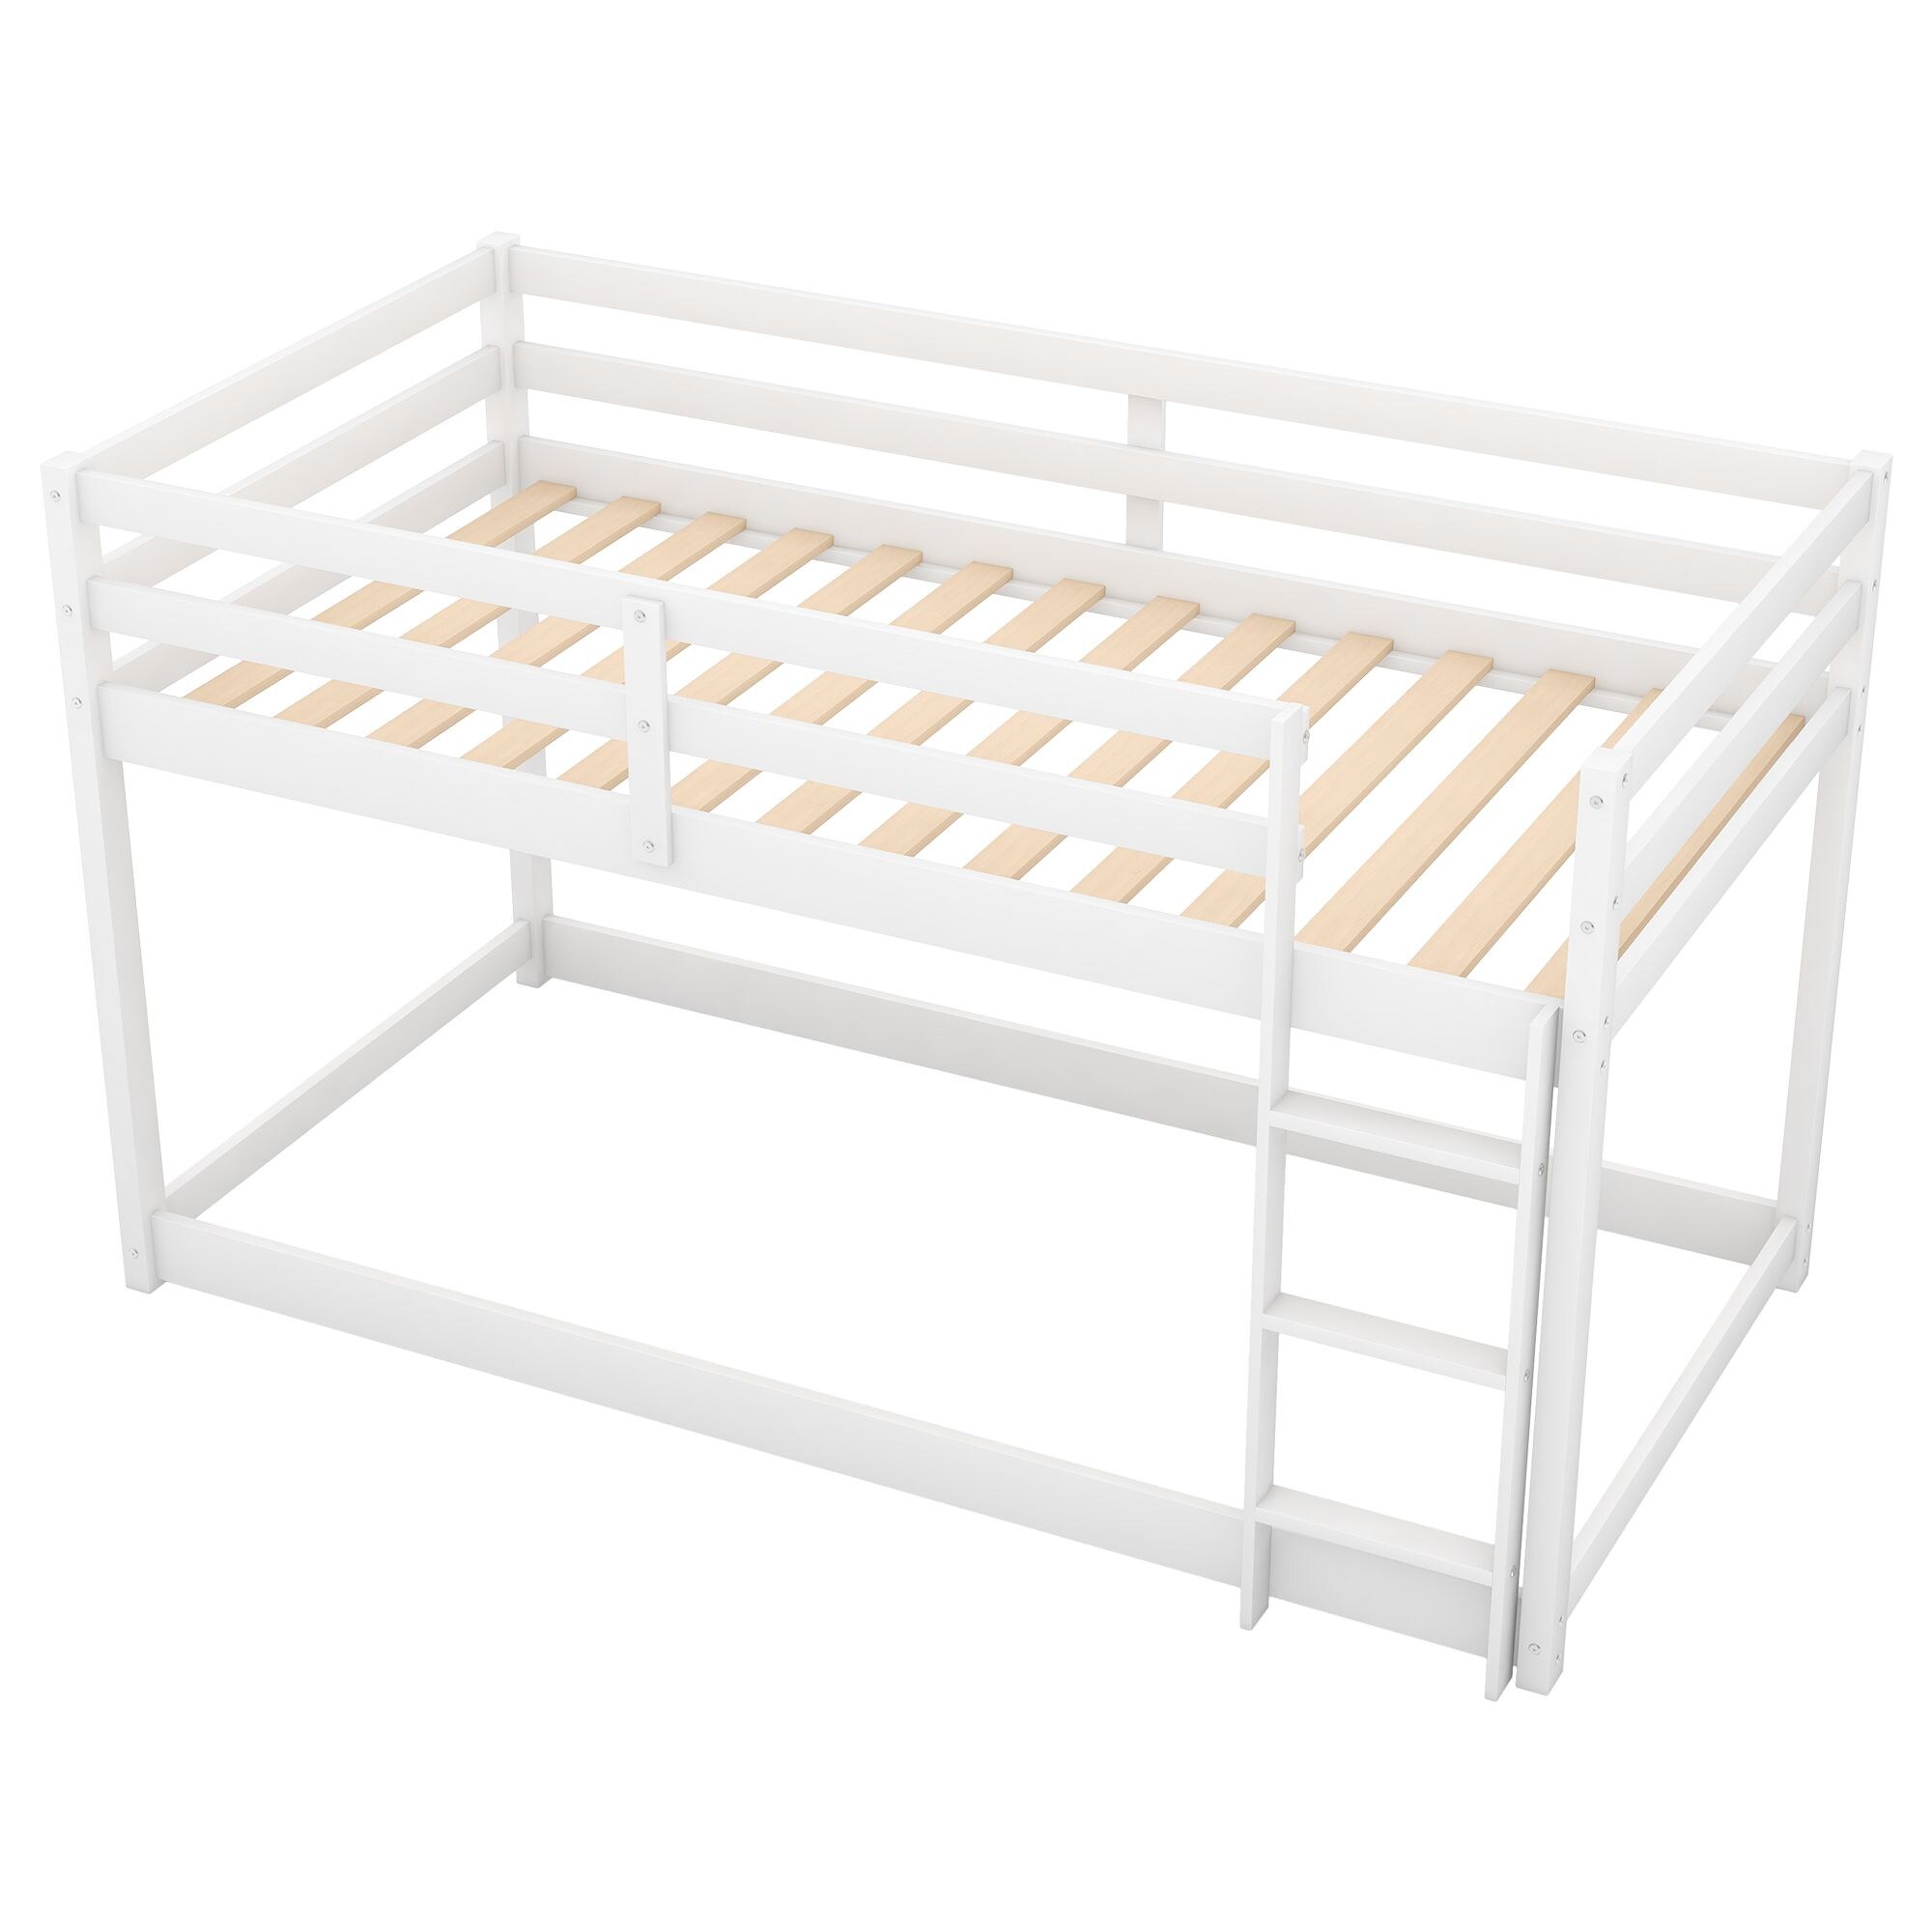 Yiekholo Low Profile Twin Over Twin Bunk Bed, White, Safe and